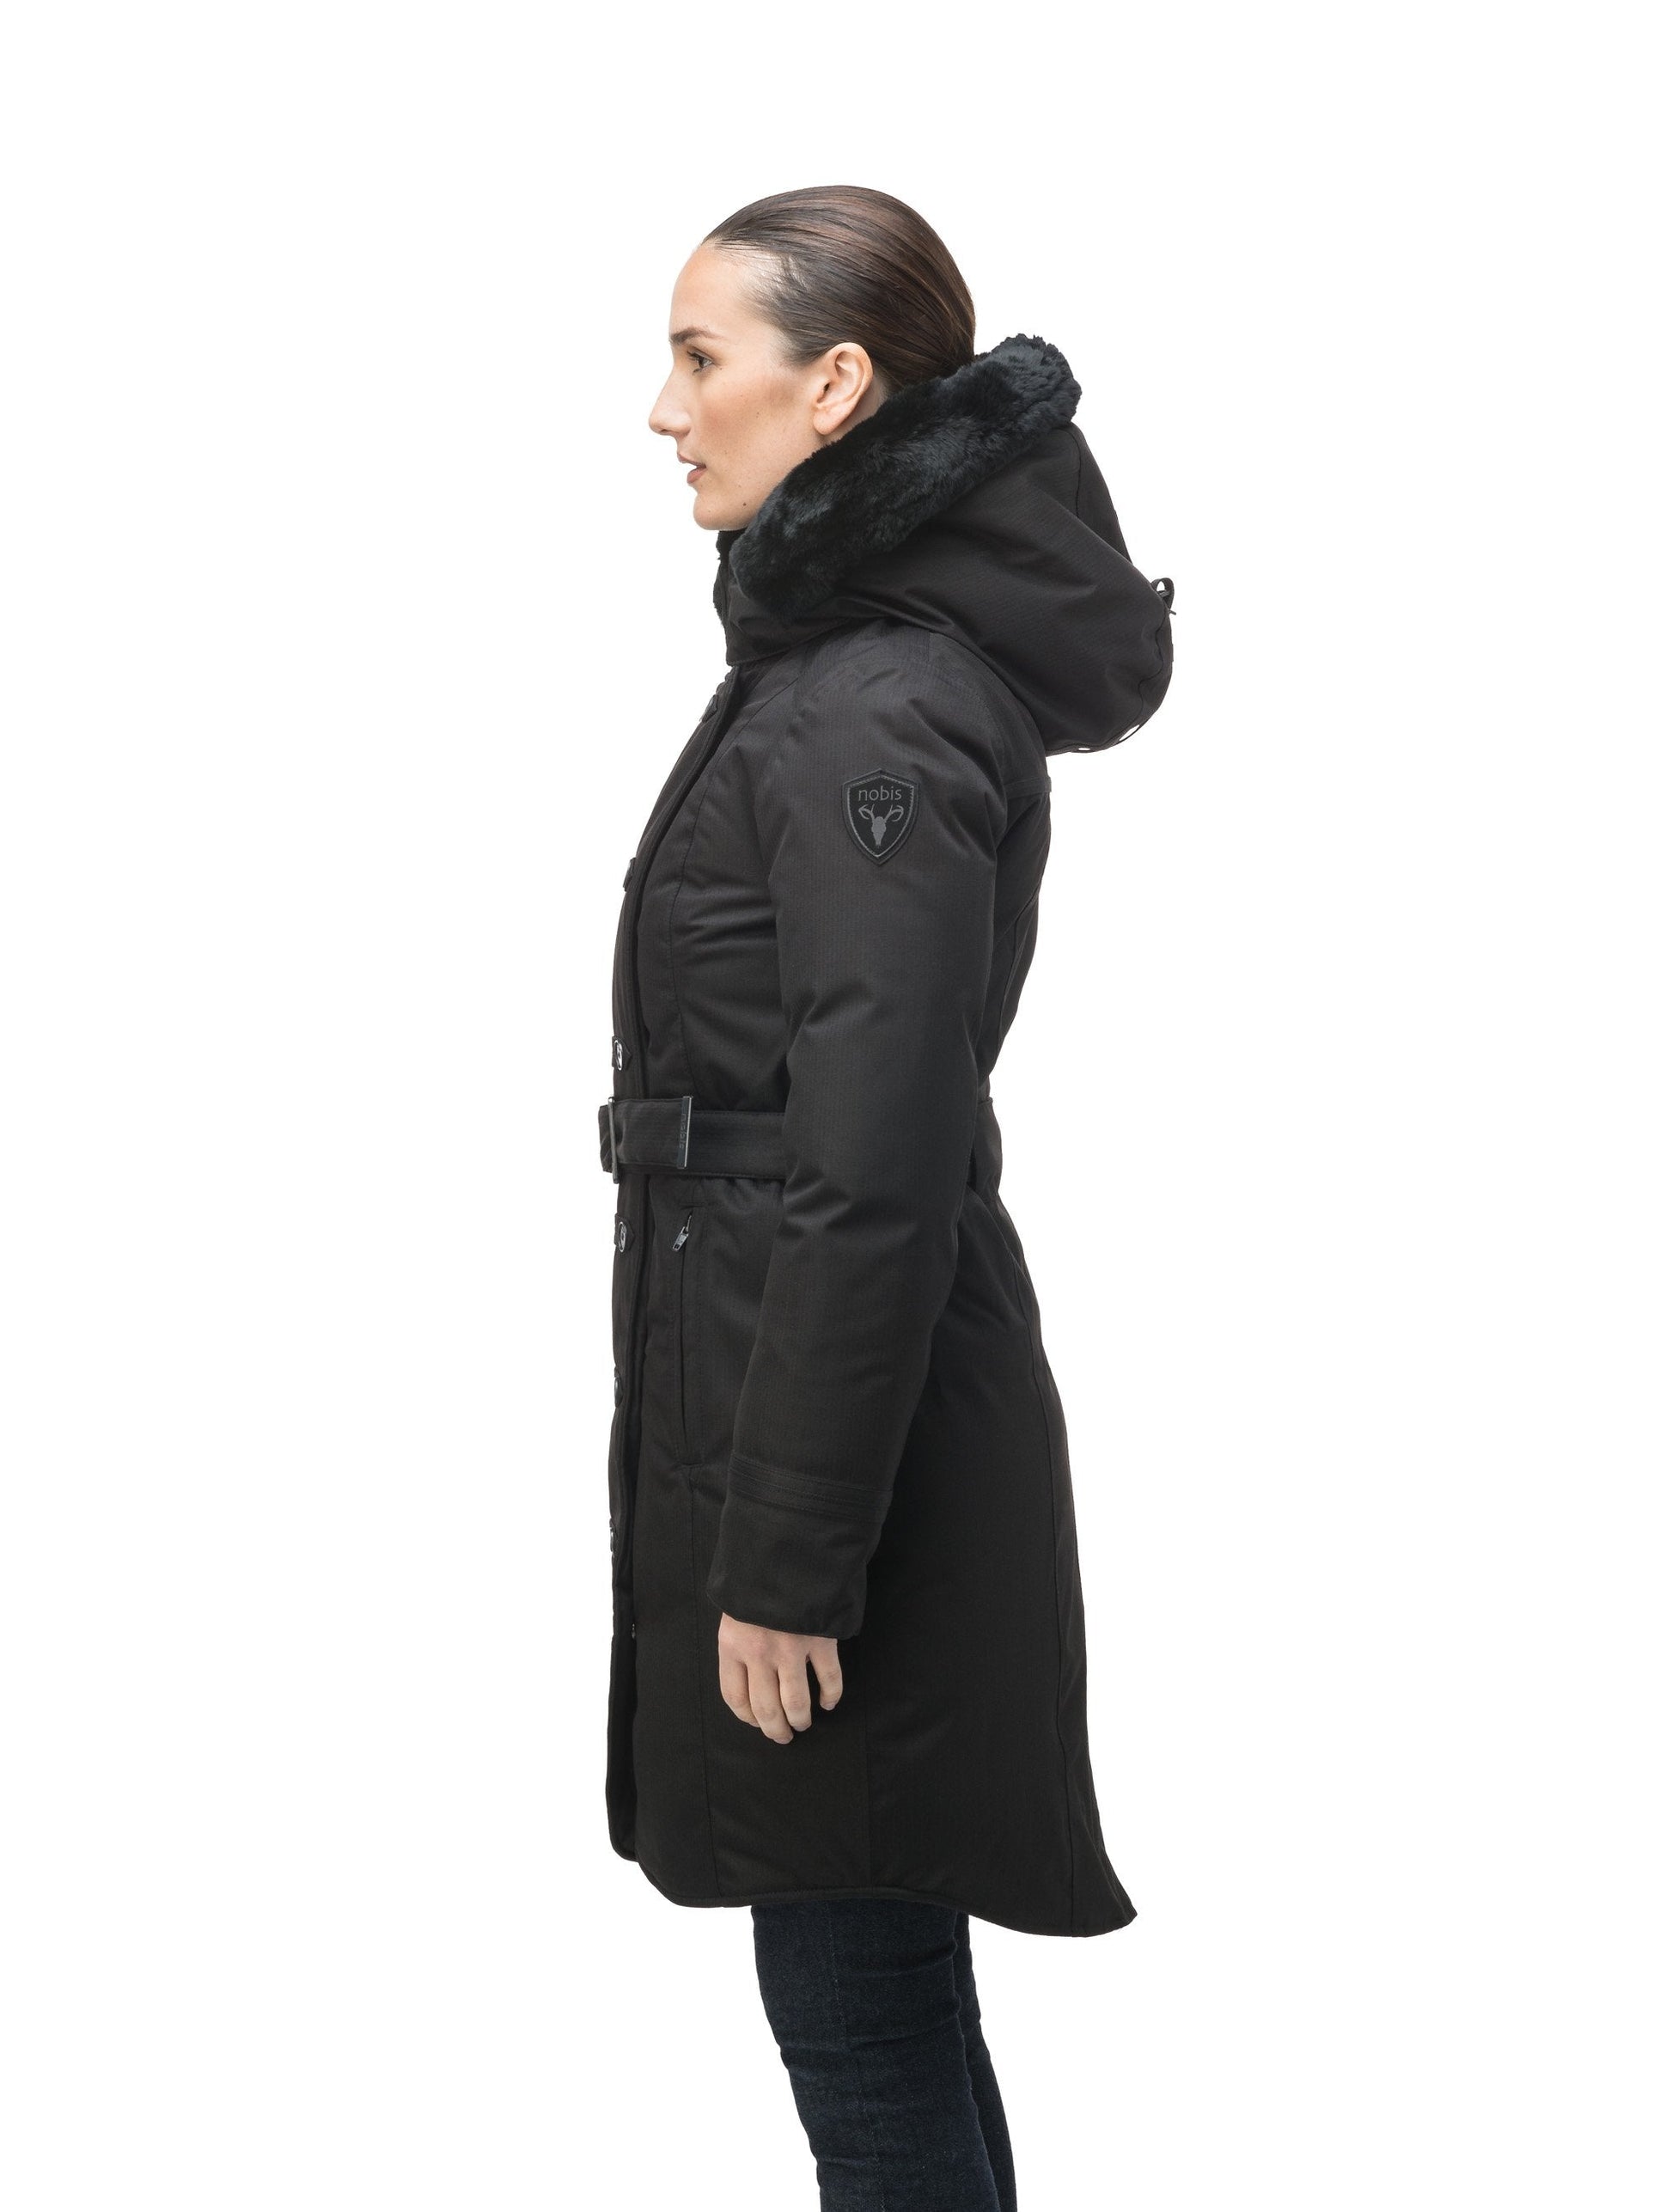 Women's down filled calf length parka with belted waist, and removable Rex Rabbit fur collar in CH Black